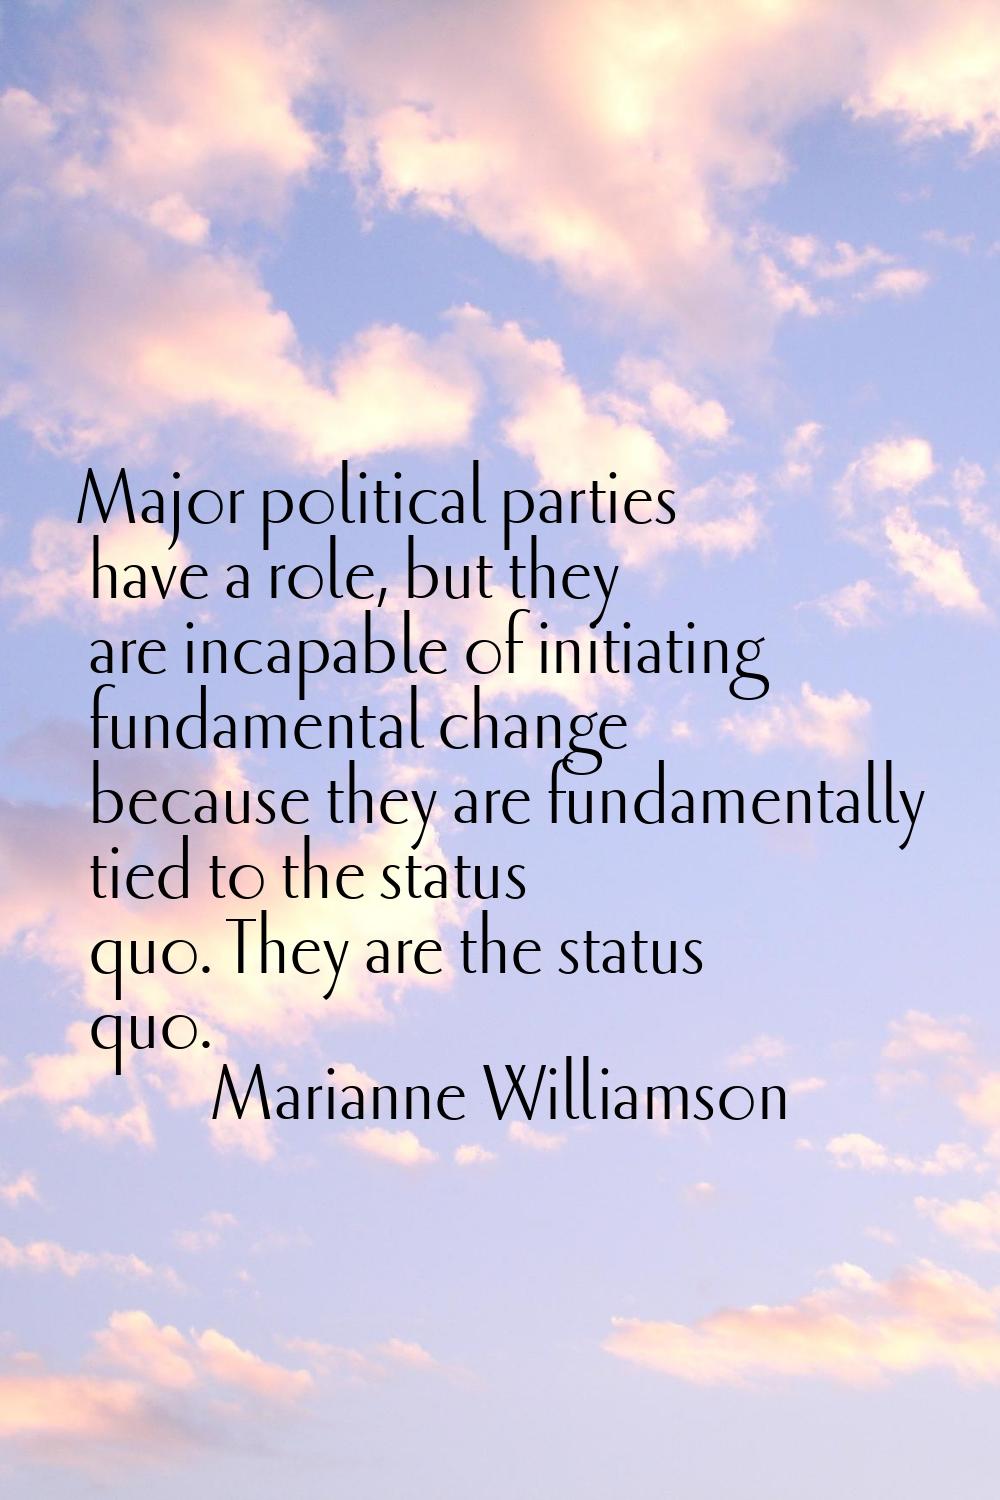 Major political parties have a role, but they are incapable of initiating fundamental change becaus